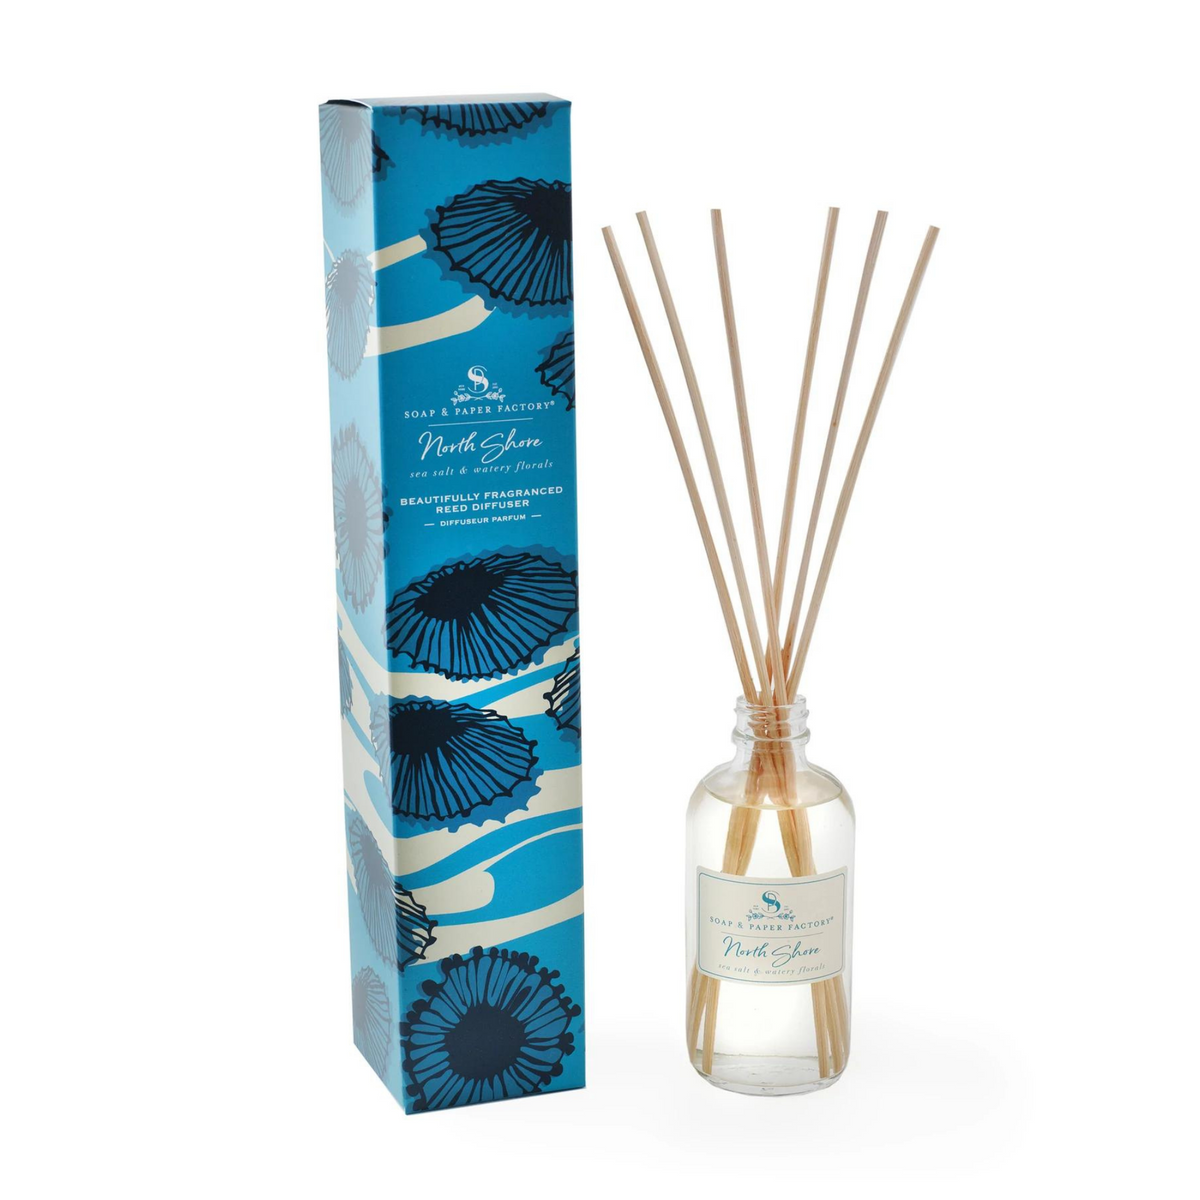 Primary Image of North Shore Reed Diffuser